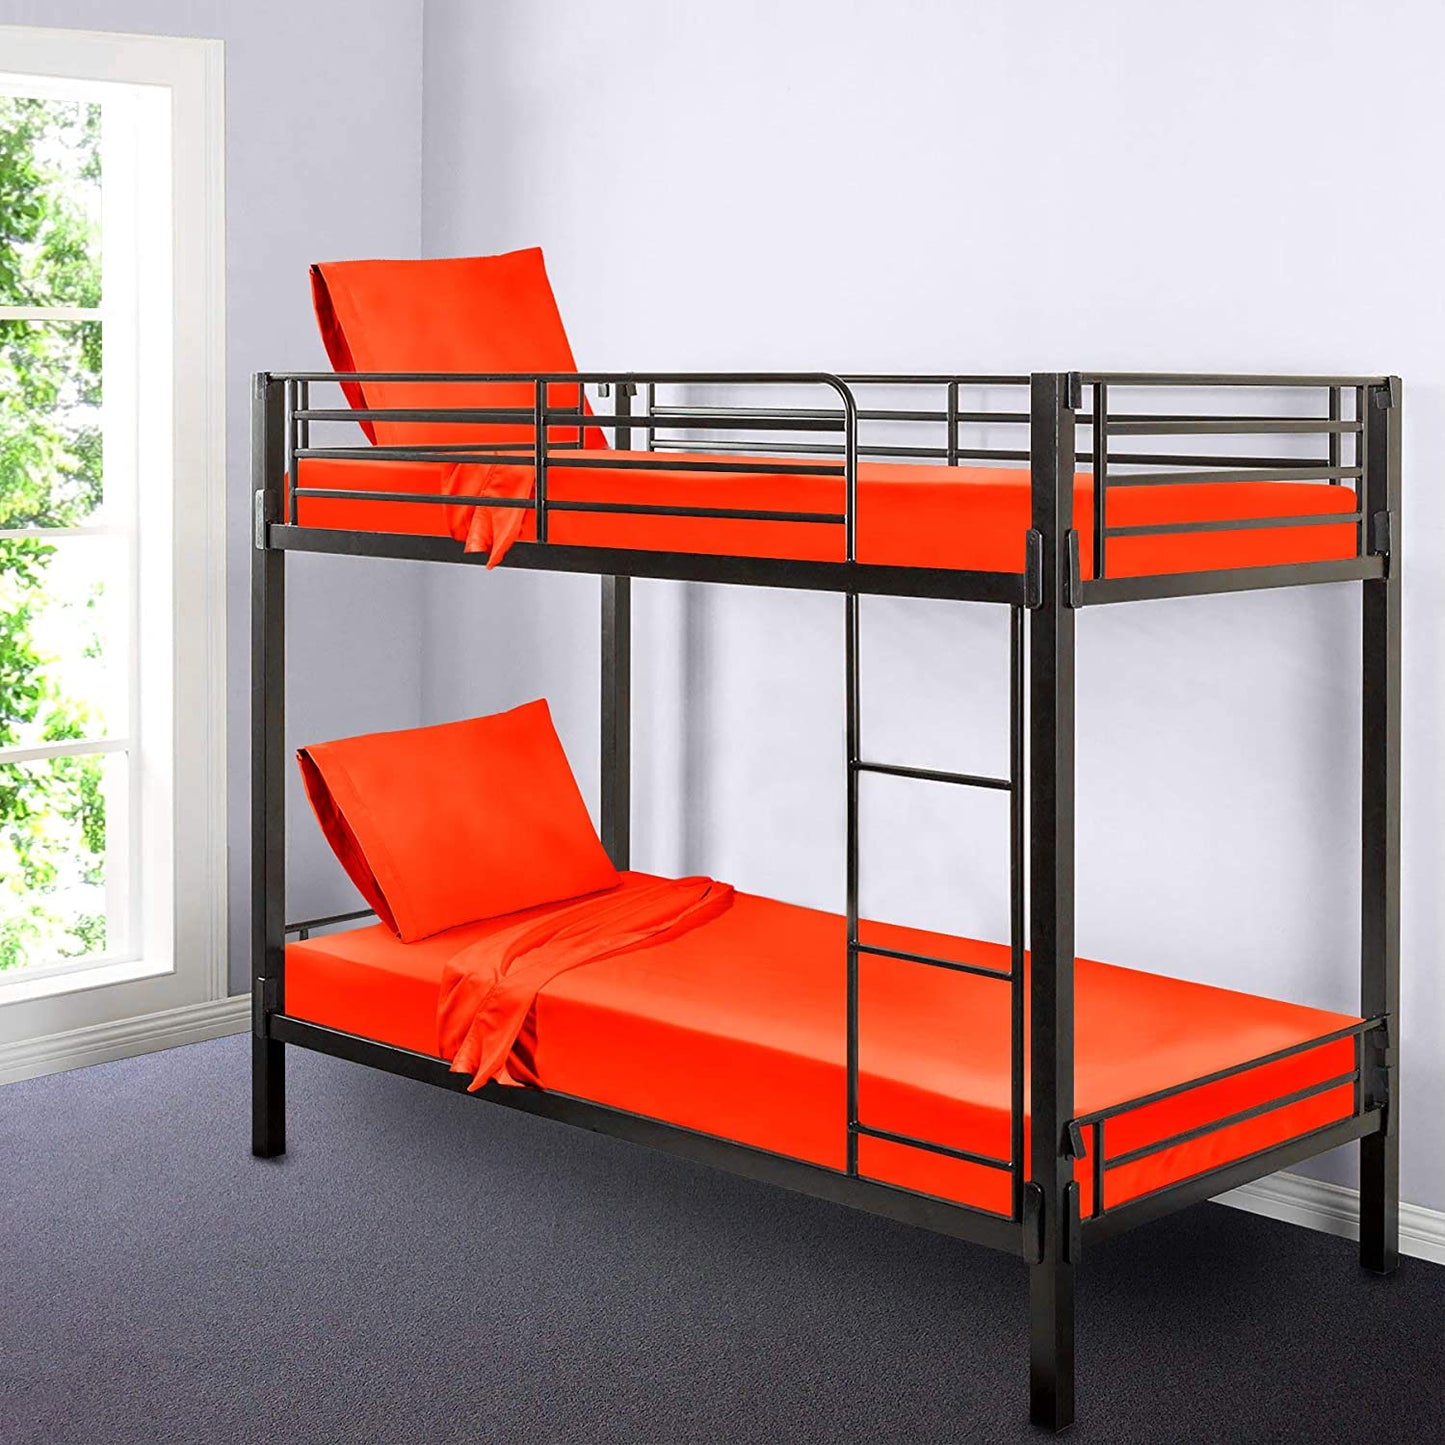 Gilbins 30" x 75" Cot Size 3-Piece Bed Sheet Set, Made of Ultra Soft Cotton, Perfect for Camp Bunk Beds/RVs/Guest Beds Orange